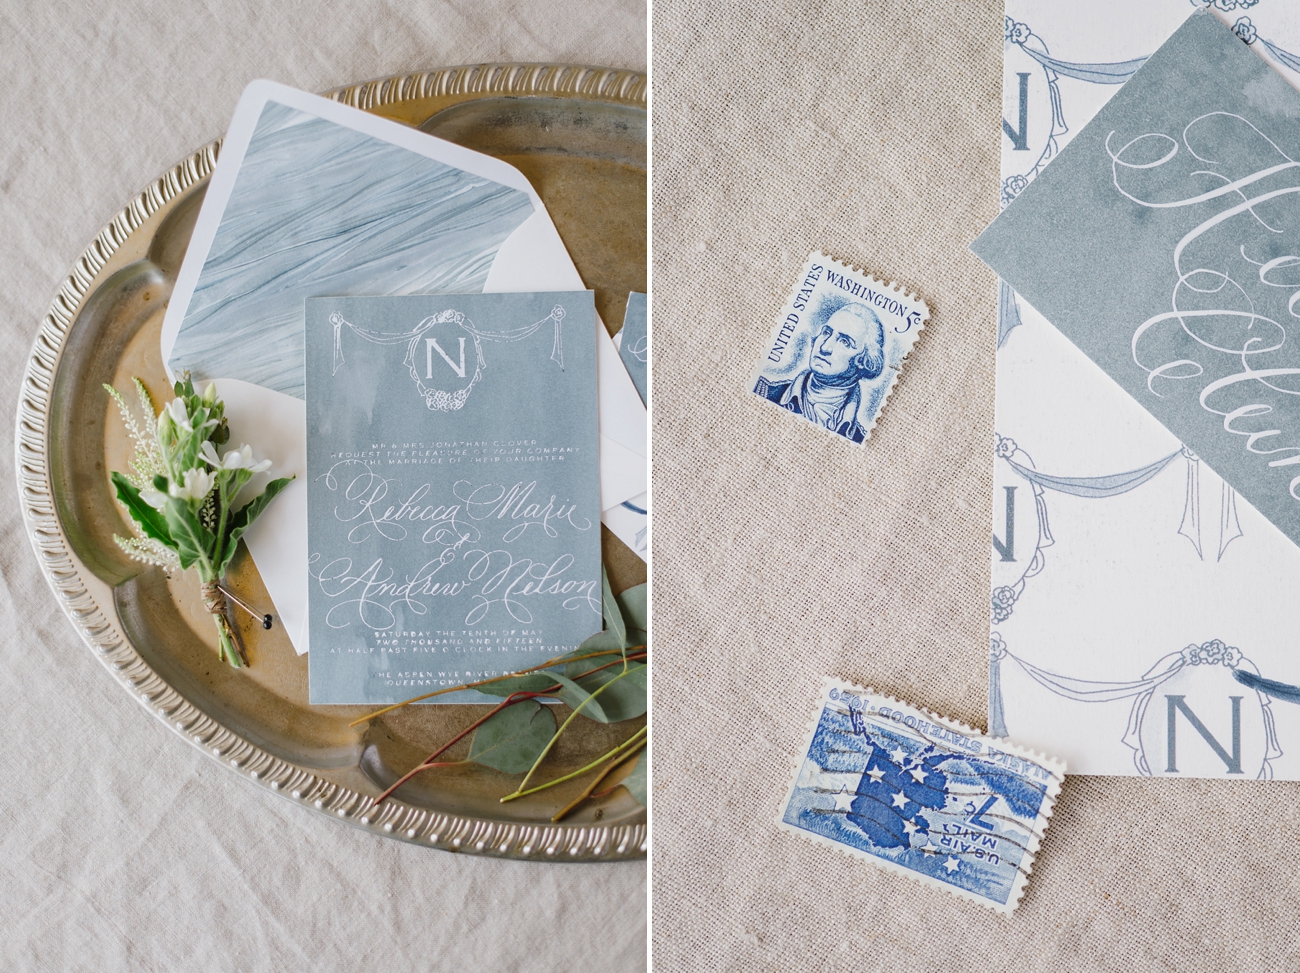 Romantic Garden Wedding Inspiration with Blue and Grey Details | Natalie Franke Photography as seen on Grey Likes Weddings 